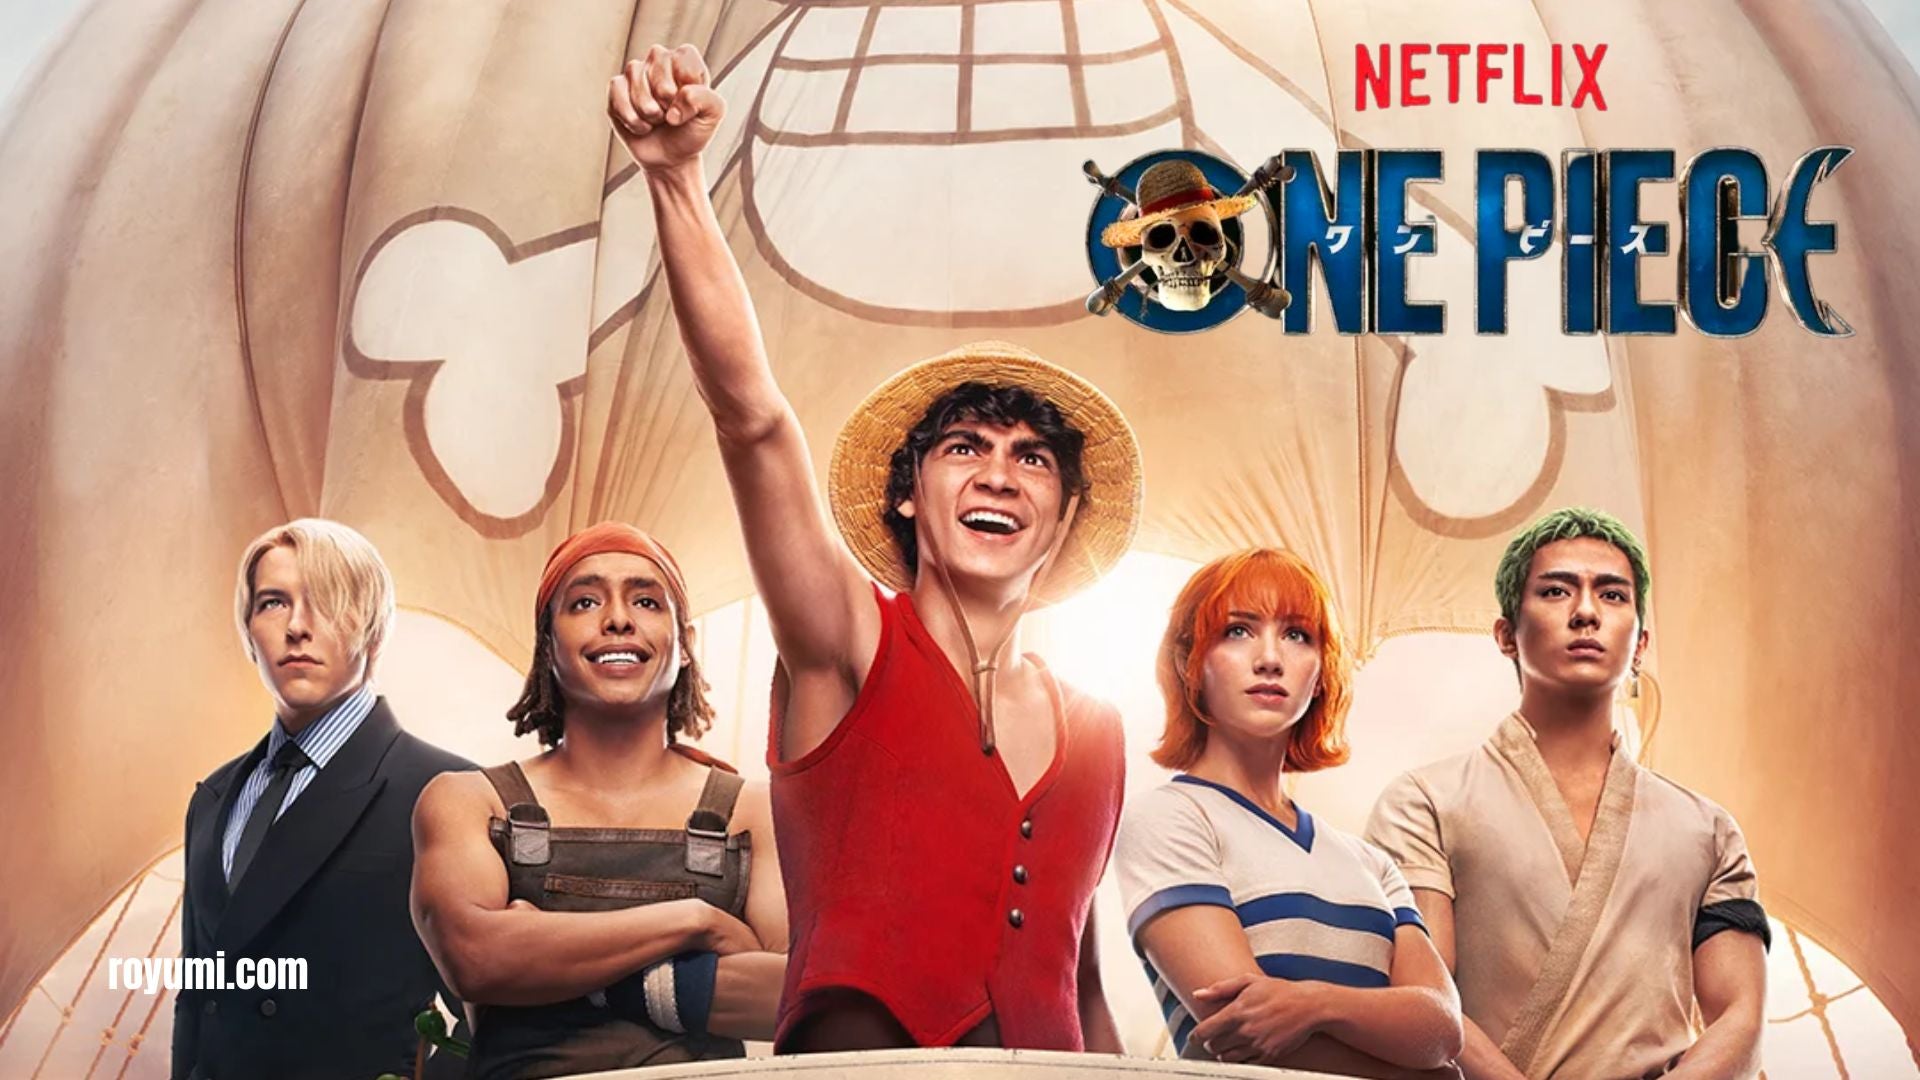 Premiere of the One Piece series on Netflix: the treasure hunt begins!